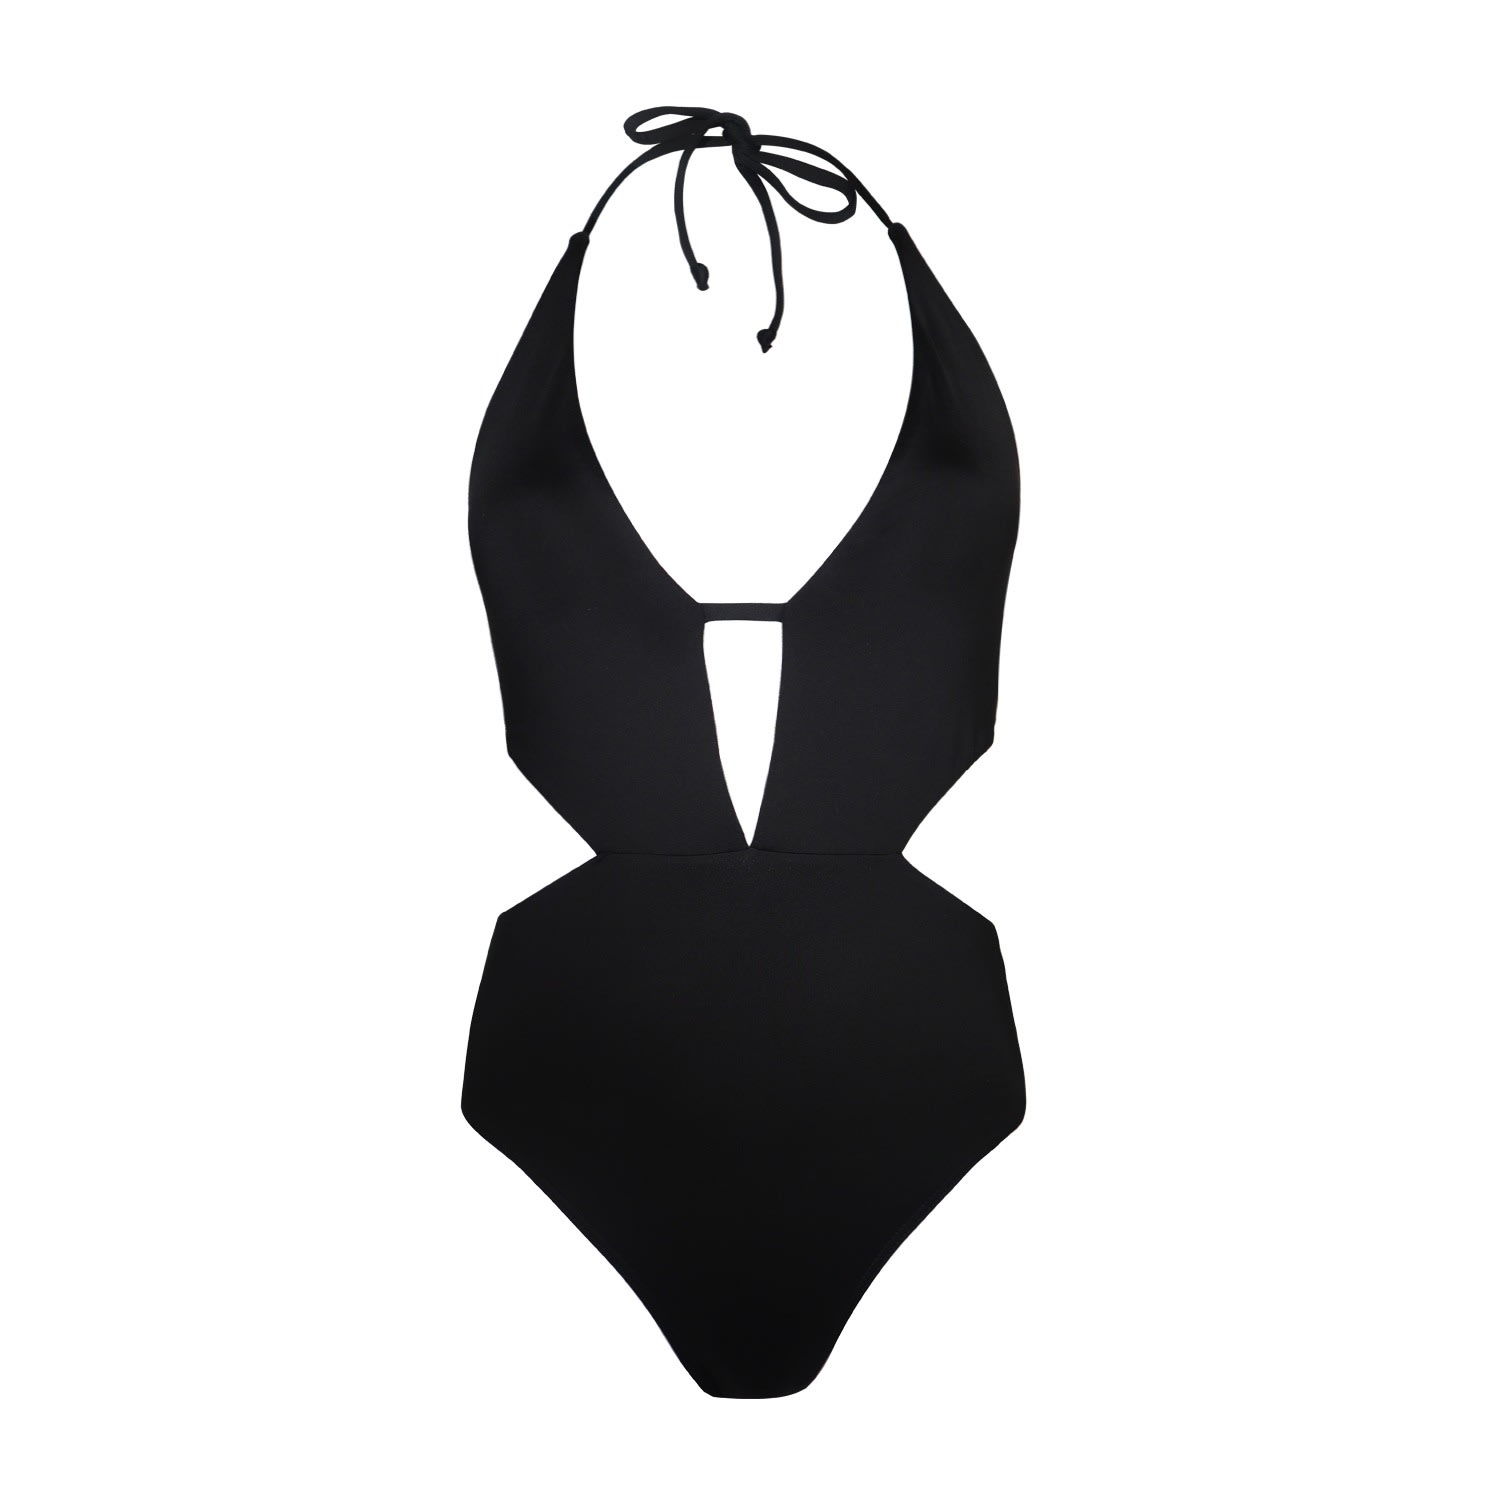 Women's Black Cut Out One Piece Extra Small AquaJelly